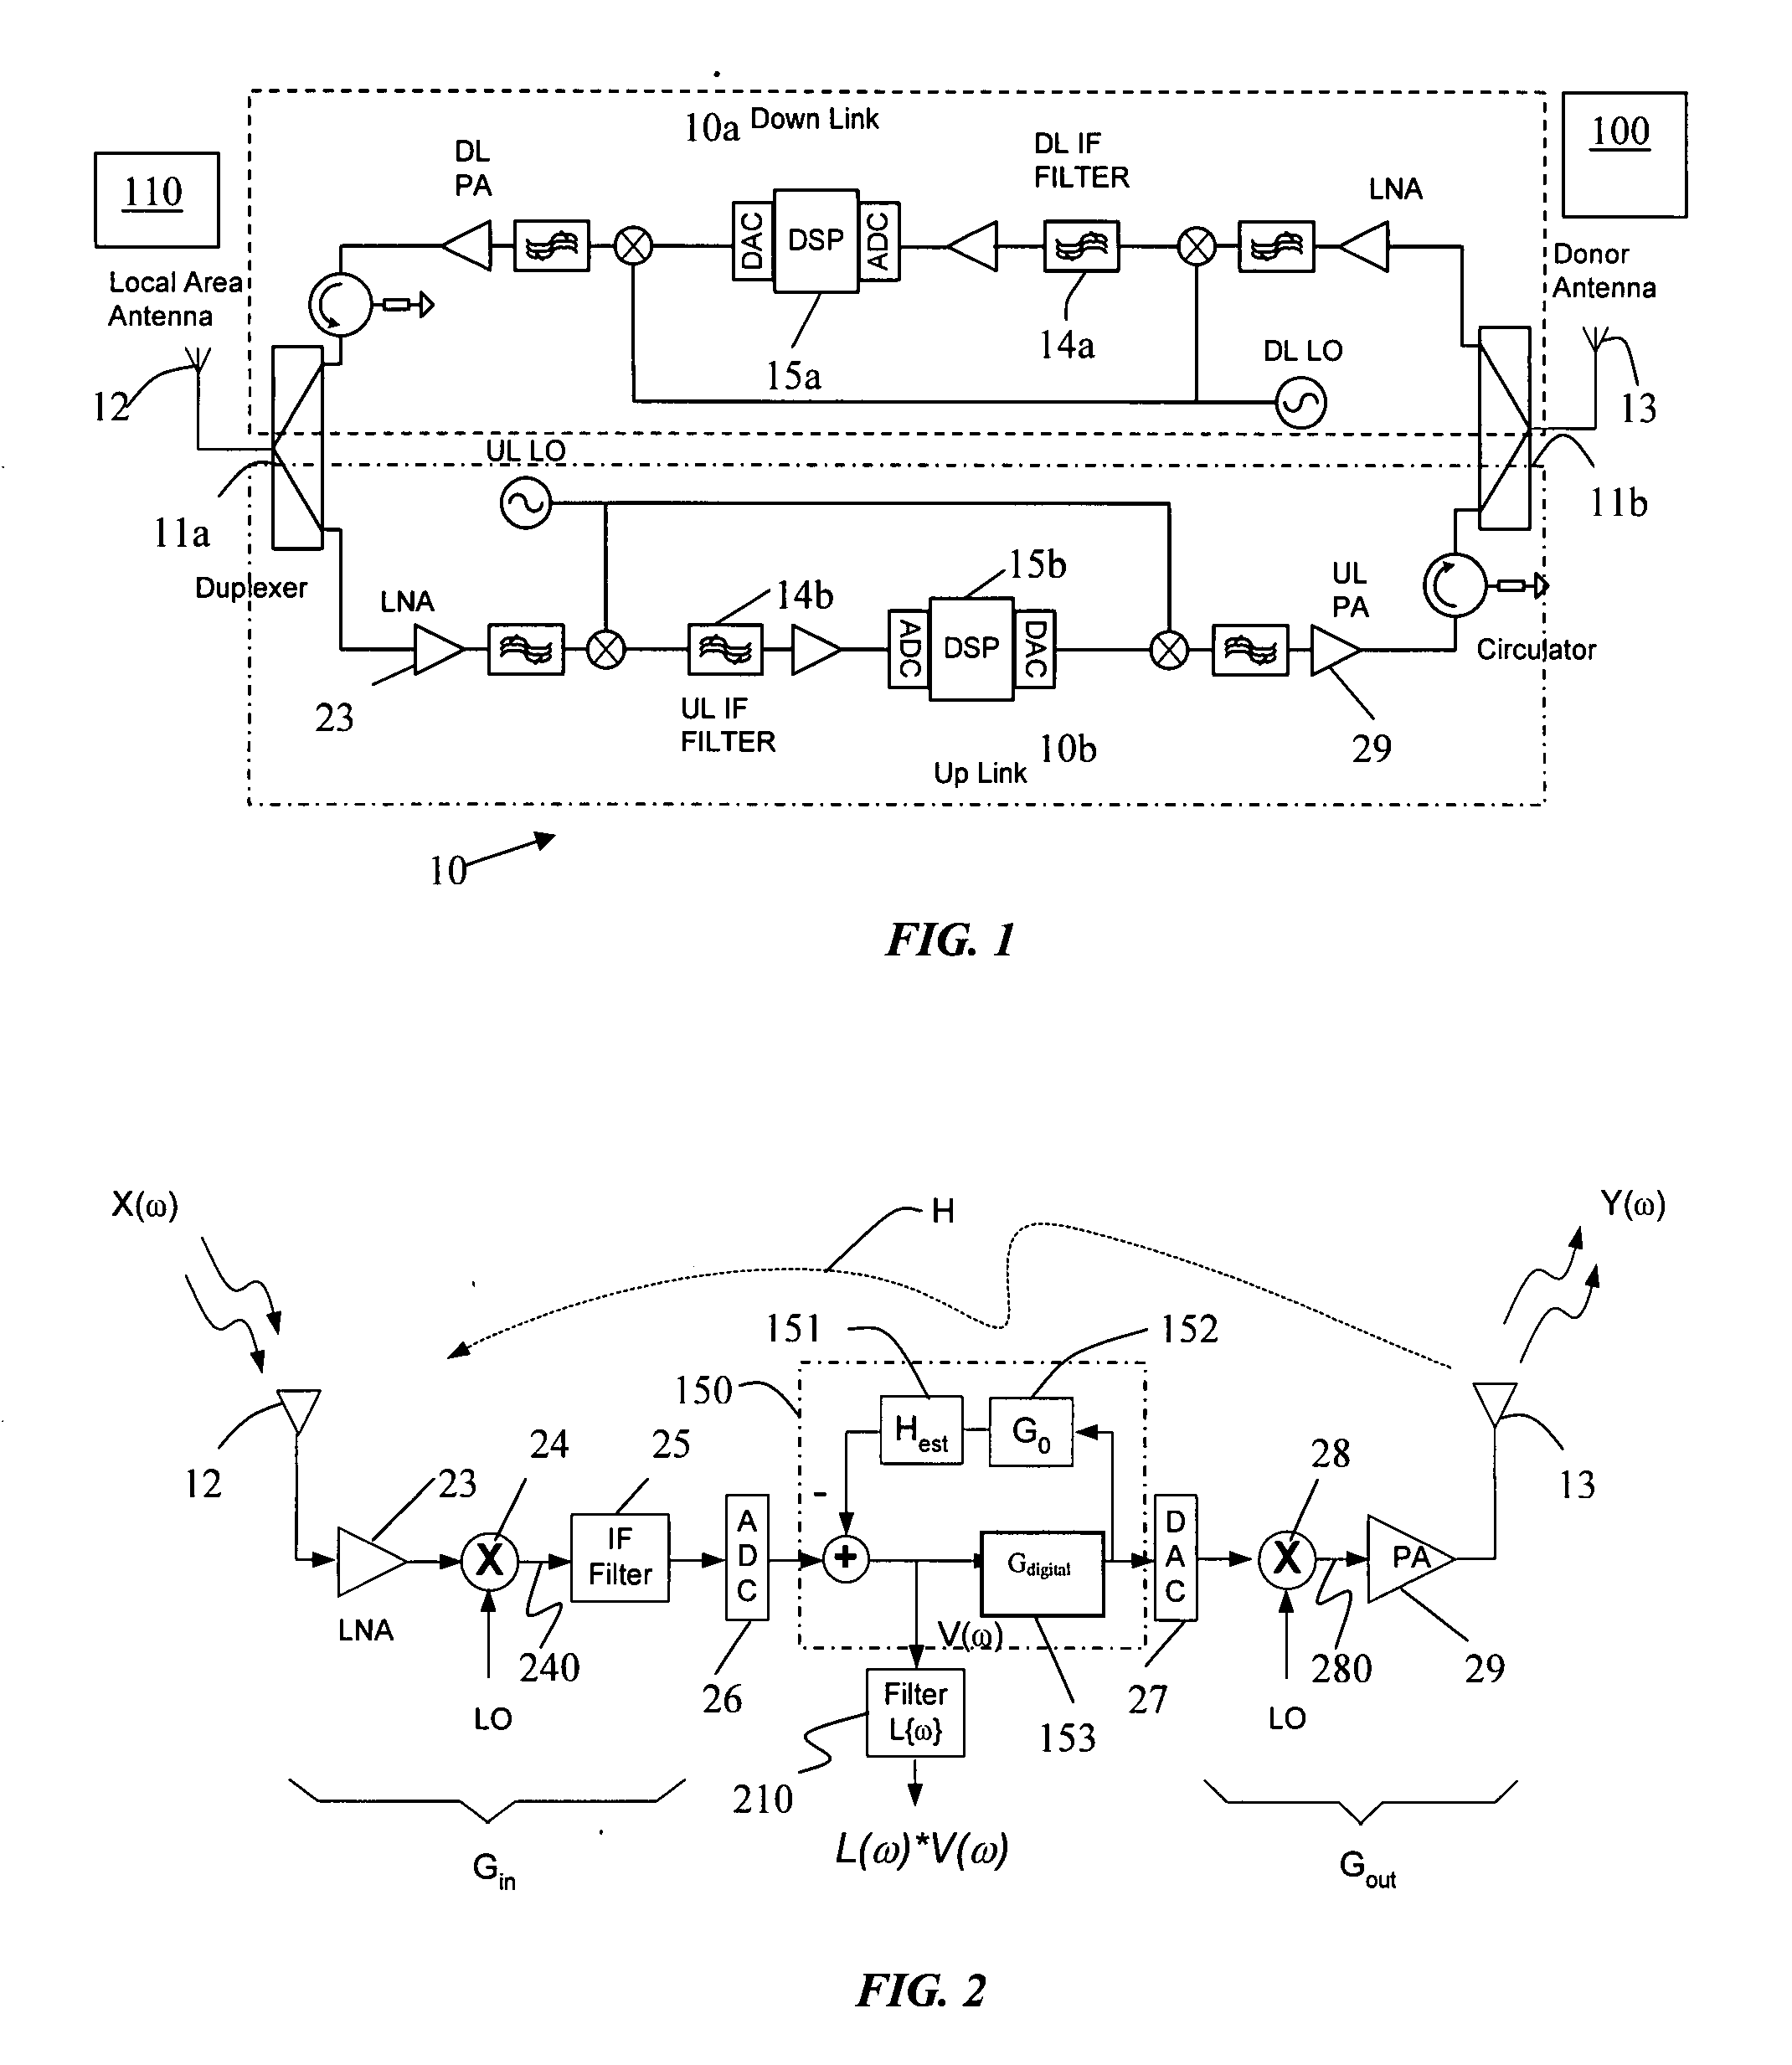 Adaptive echo cancellation for an on-frequency RF repeater using a weighted power spectrum